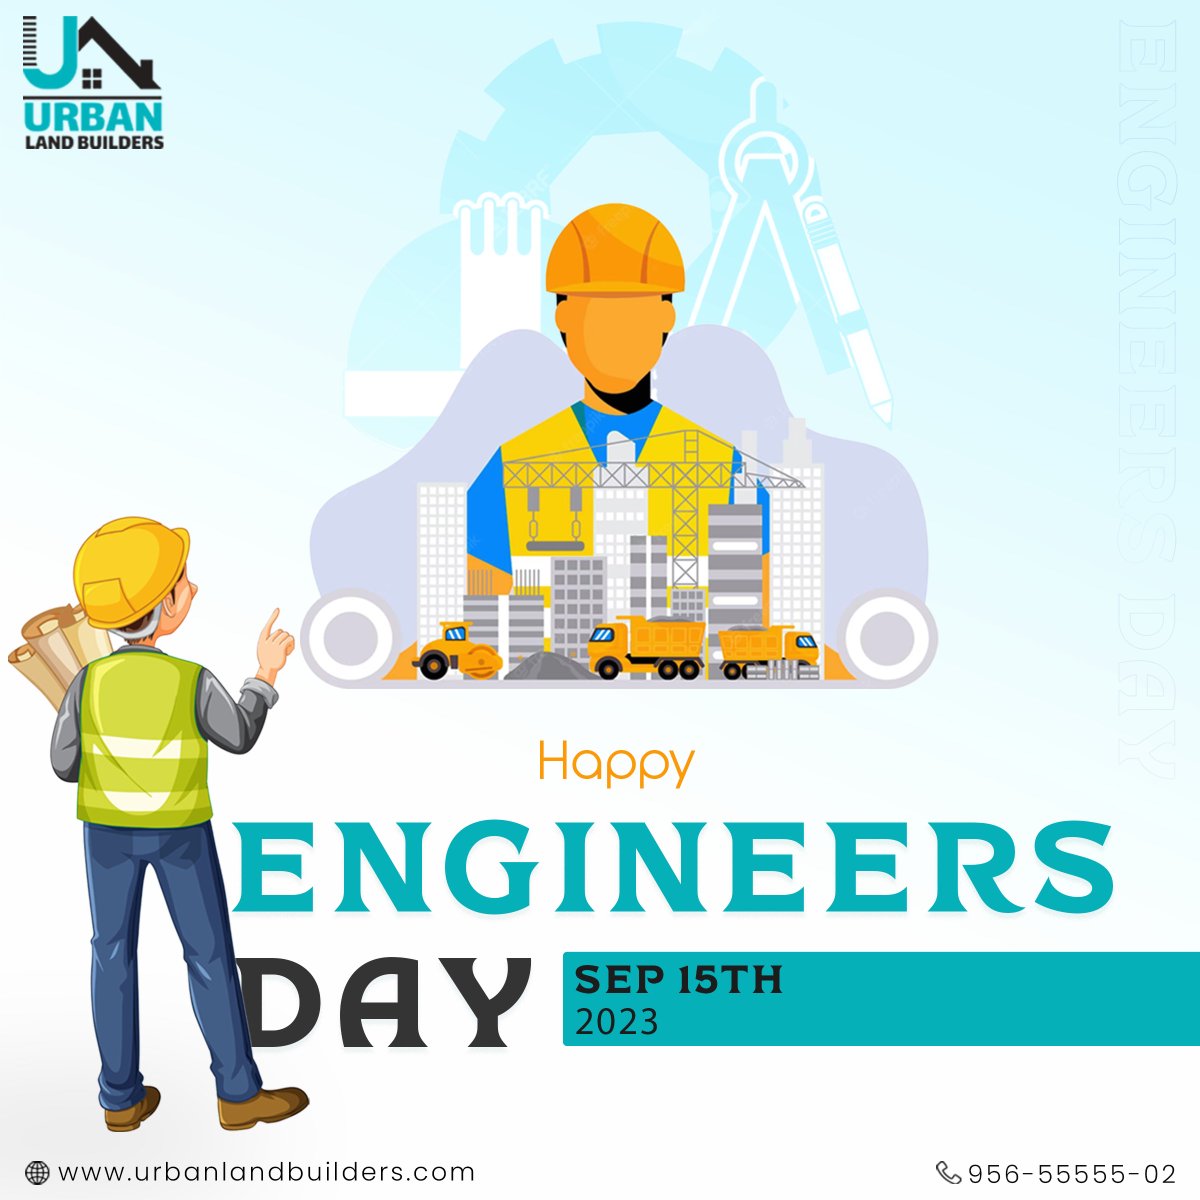 Happy Engineers' Day to all the creative minds who turn dreams into reality through innovation and technology! Wishing all the engineers a day filled with inspiration, innovation, and success. Happy Engineers' Day!'

#engineersday #engineeringinnovation #urbanlandbuilders #kharar